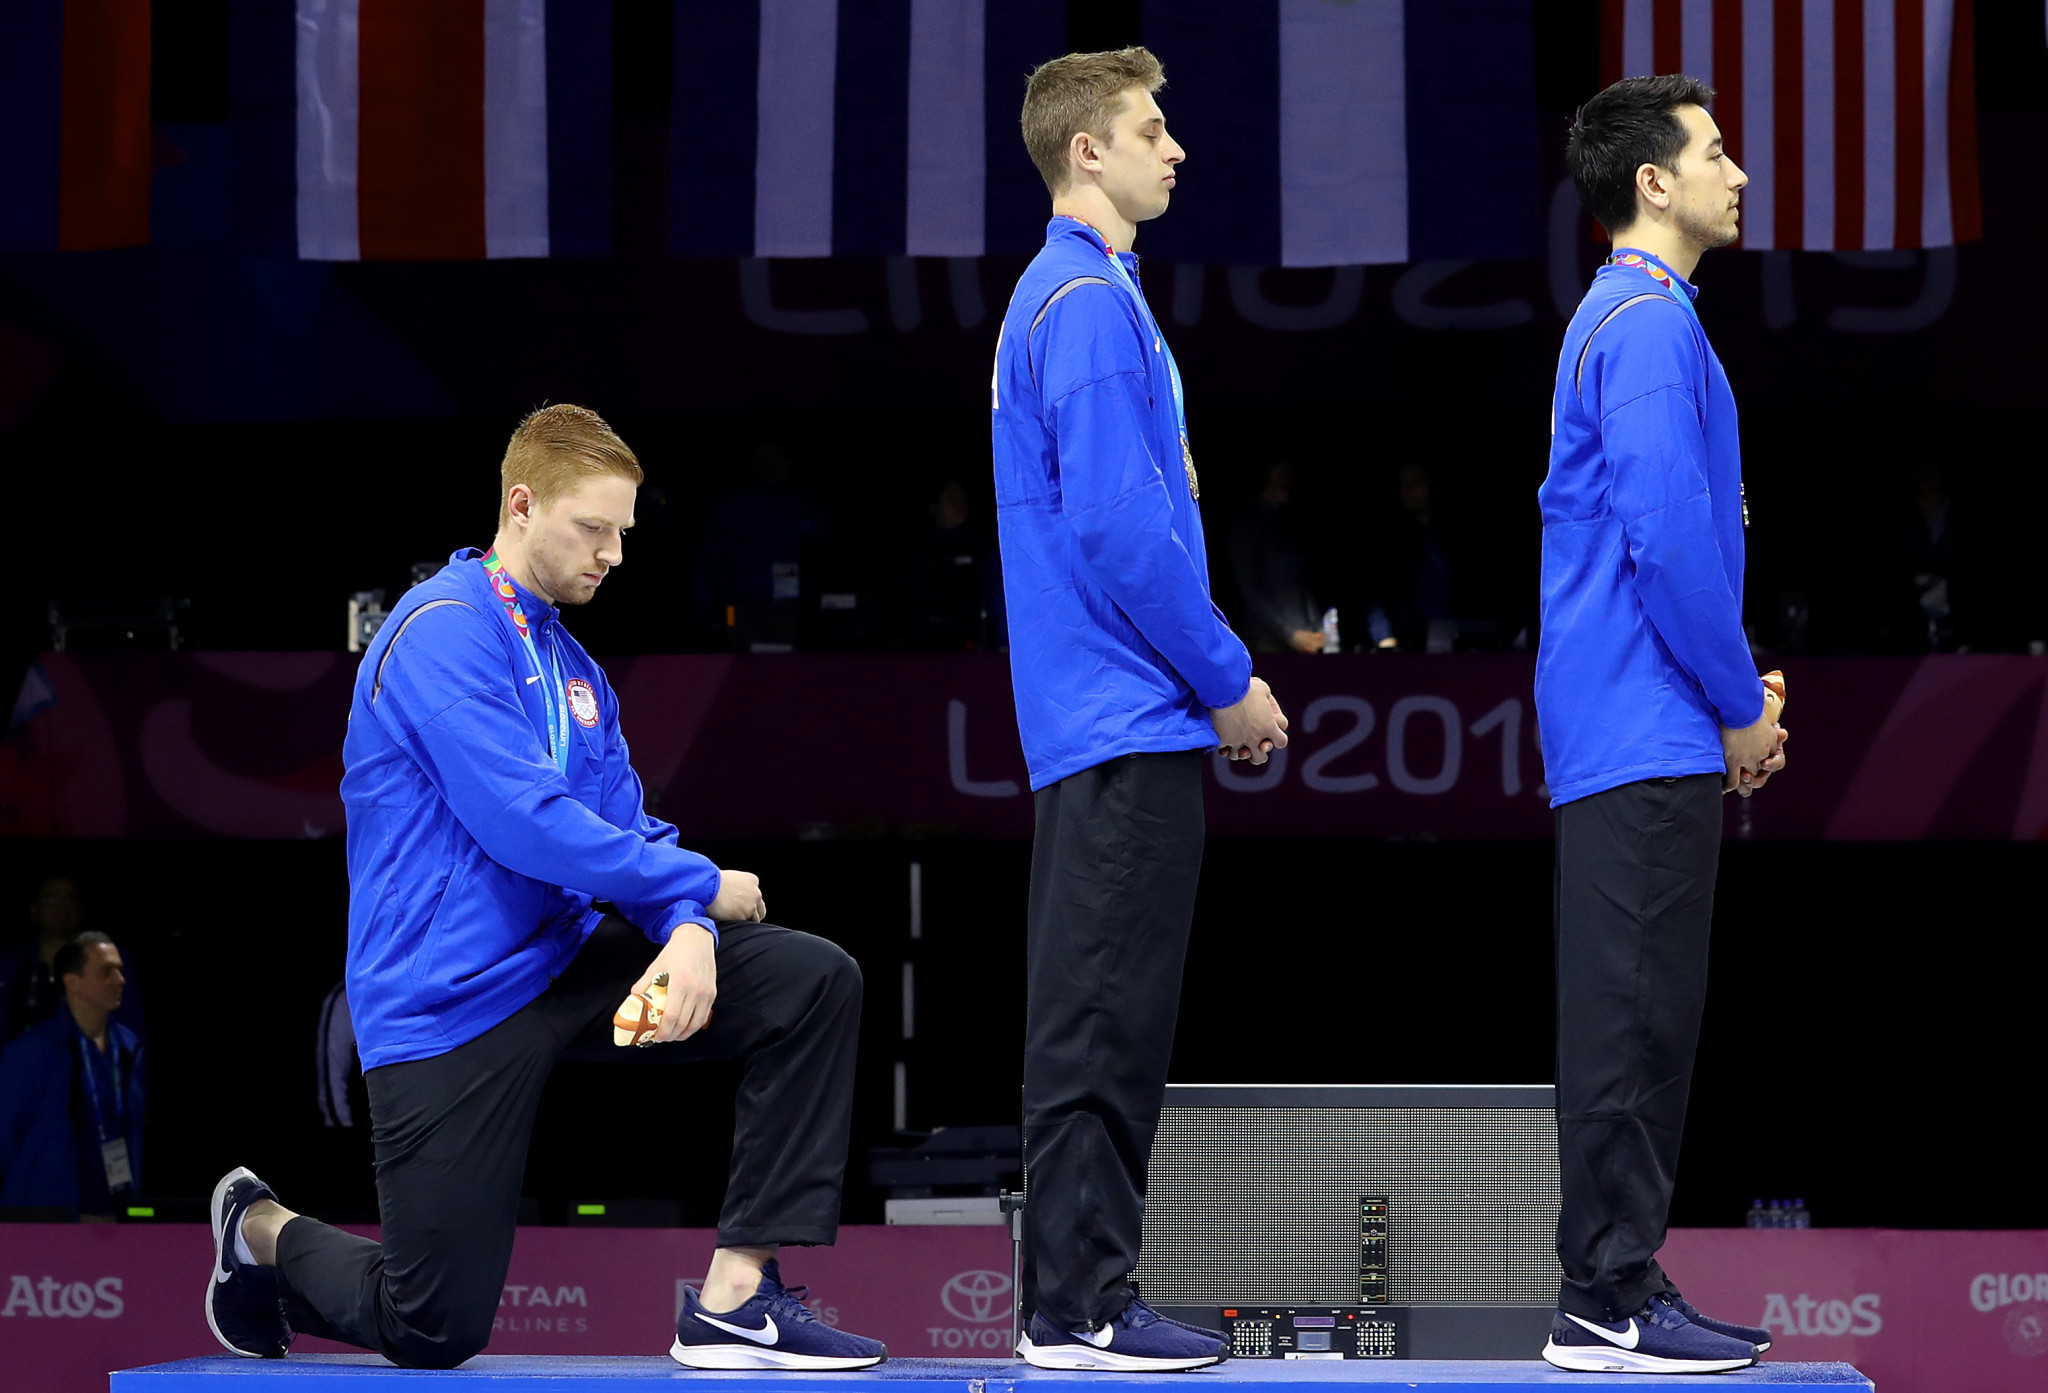 Race Imboden took a knee during the men's team foil medal ceremony ©Getty Images